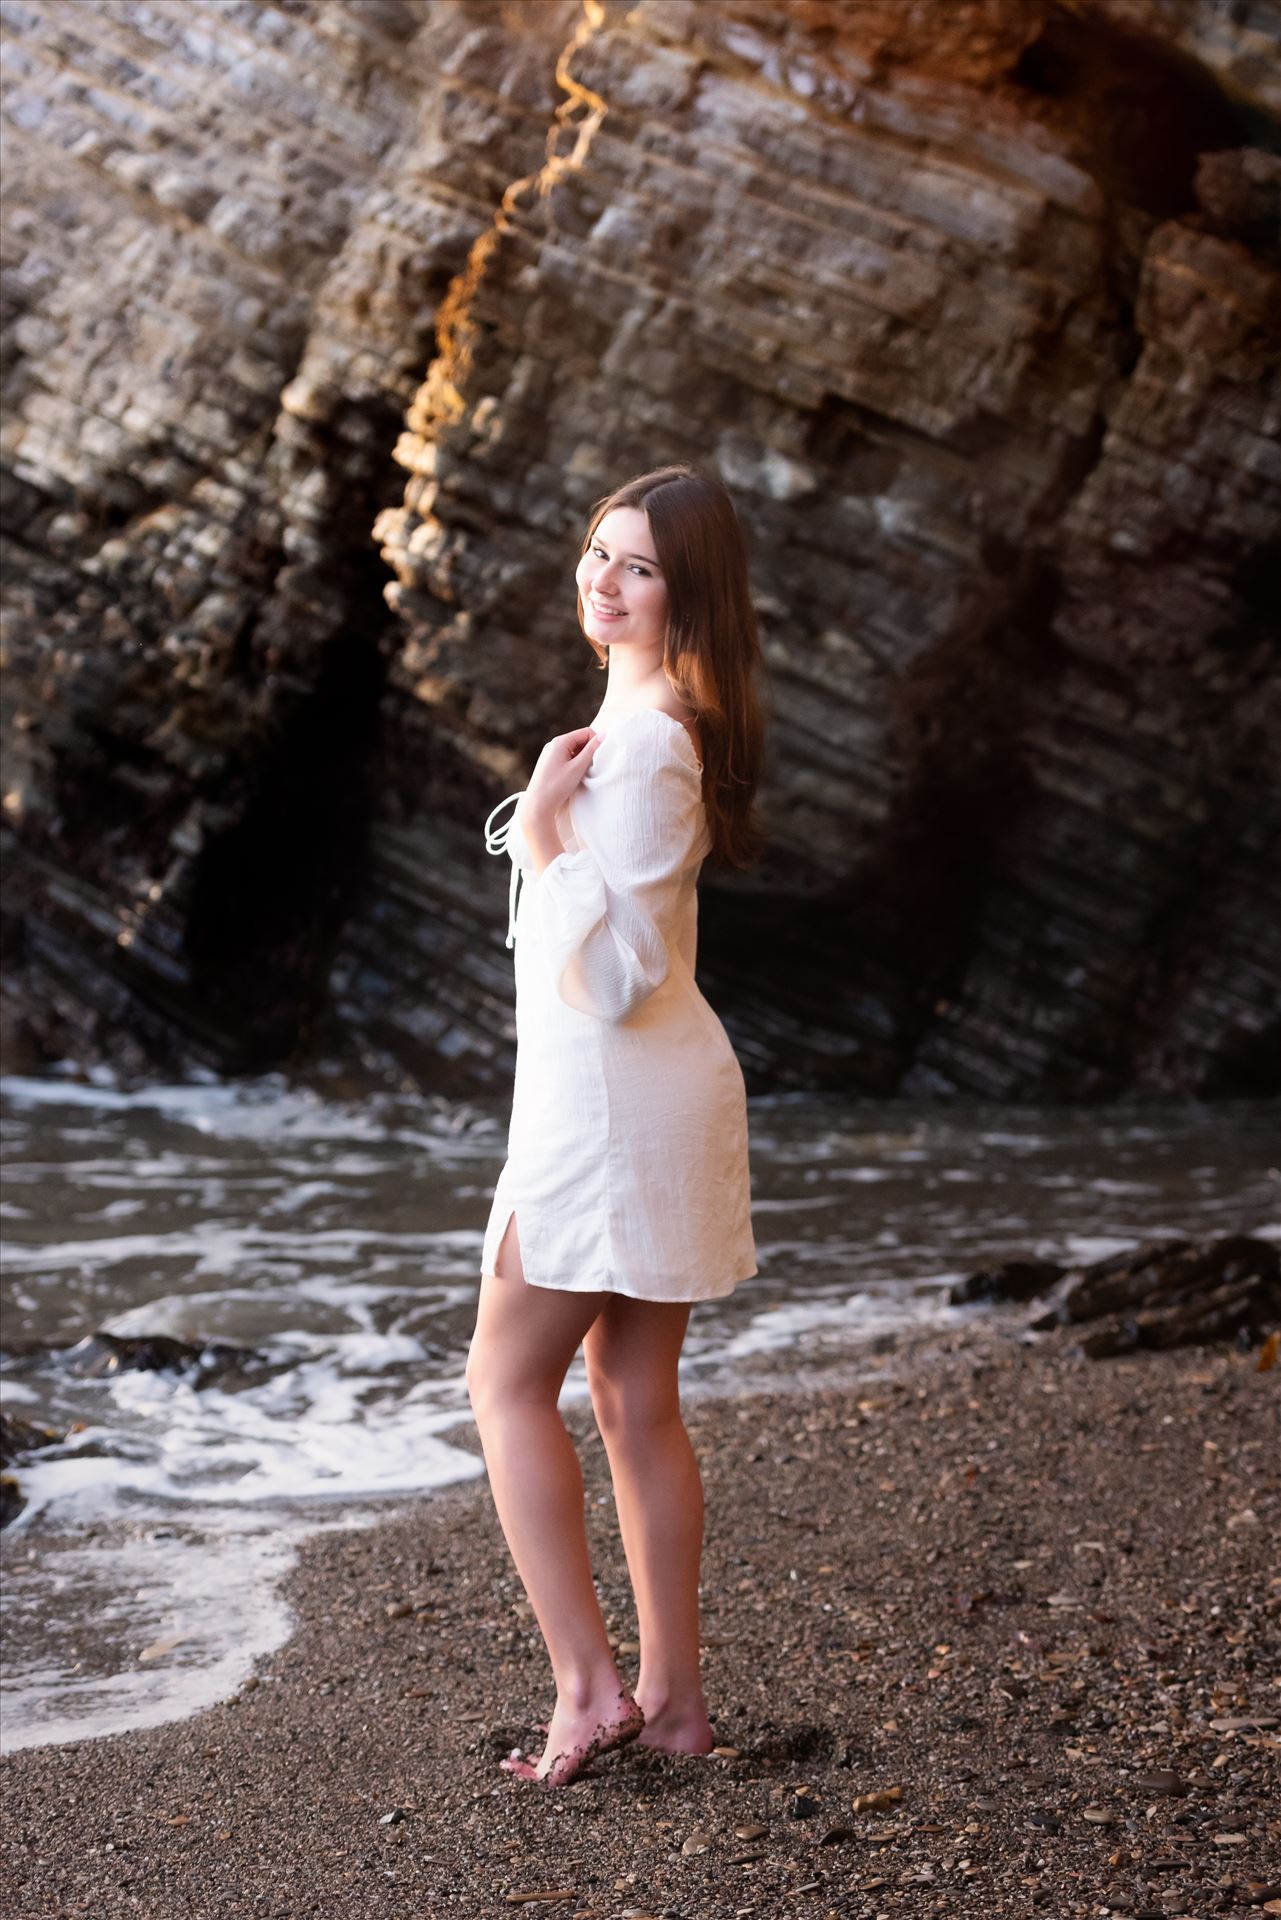 Final-9157.JPG - Mirror's Edge Photography a San Luis Obispo Luxury Portrait, Wedding and Engagement Photographer capture Hayley's Senior Portrait Session at Montana de Oro.  Hayley with water cove. by Sarah Williams